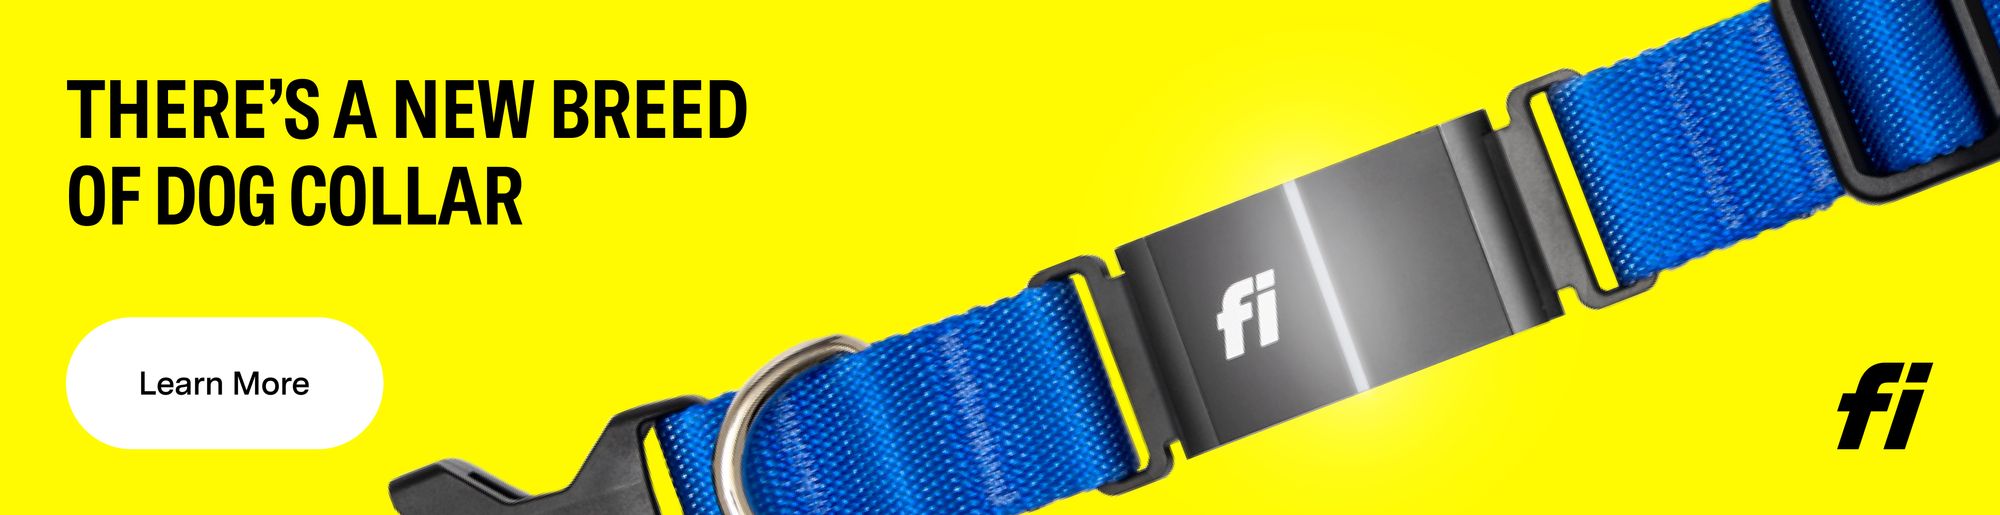 Fi Dog Collars for goldendoodle dogs